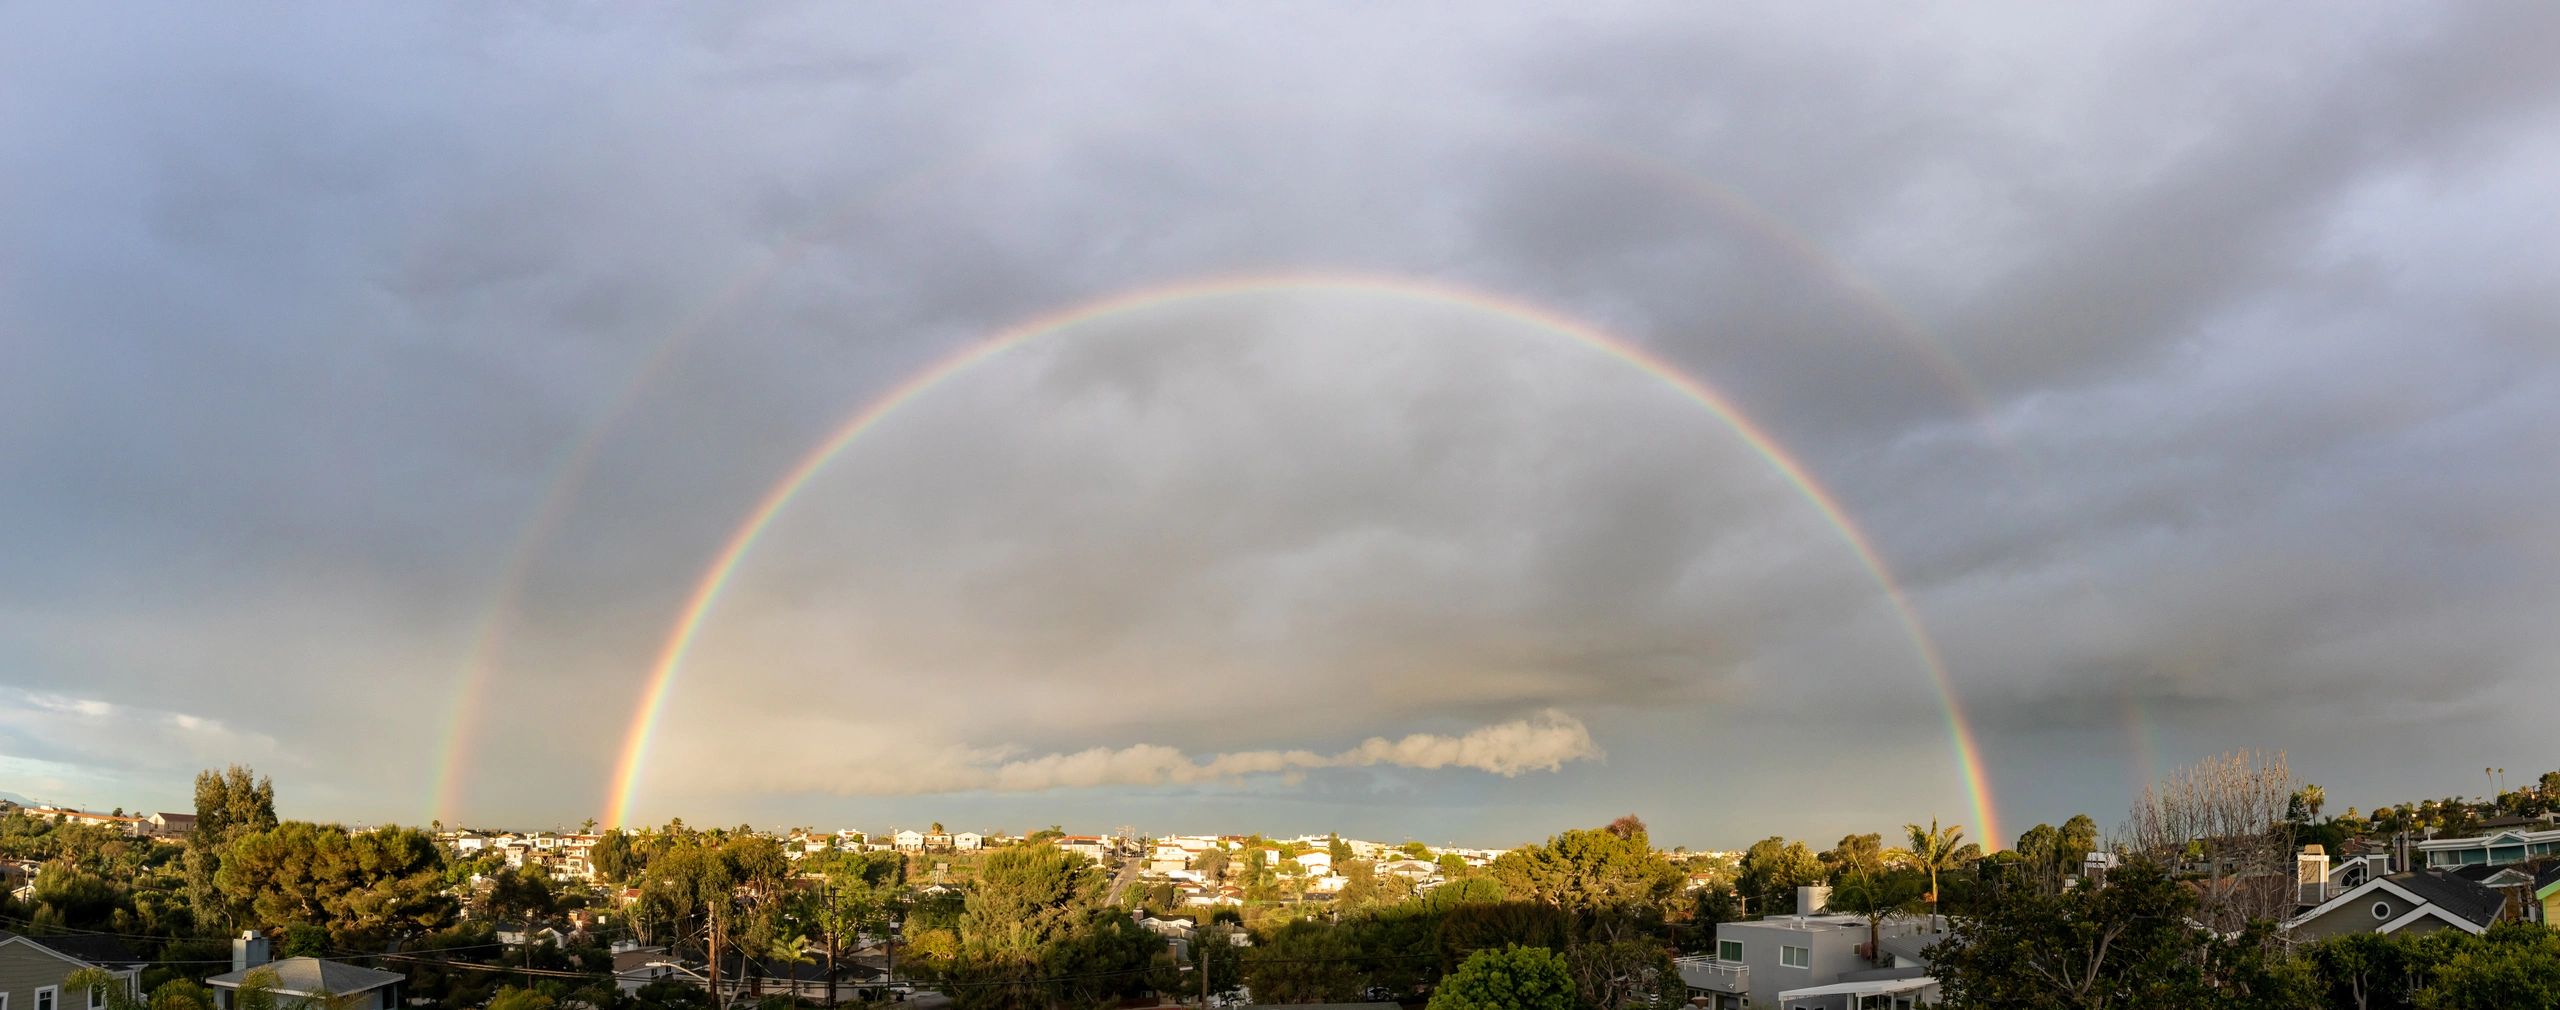 An ultra high resolution panorama of a double rainbow photographed on Saint Patrick's day.